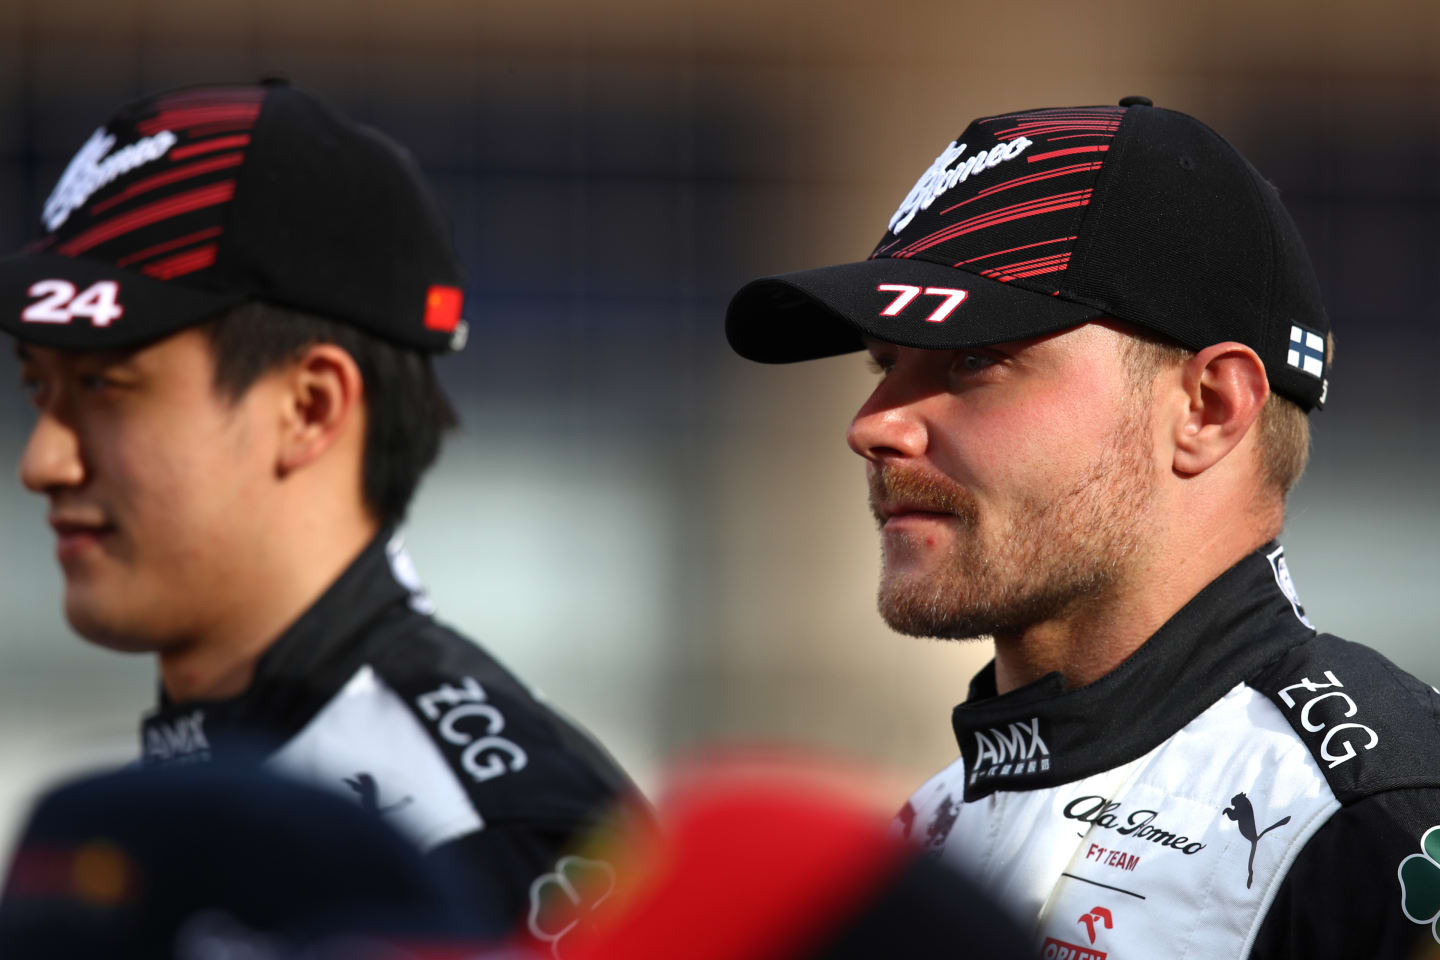 BAHRAIN, BAHRAIN - MARCH 20: Valtteri Bottas of Finland and Alfa Romeo F1 looks on as he poses for a photo prior to the F1 Grand Prix of Bahrain at Bahrain International Circuit on March 20, 2022 in Bahrain, Bahrain. (Photo by Joe Portlock - Formula 1/Formula 1 via Getty Images)